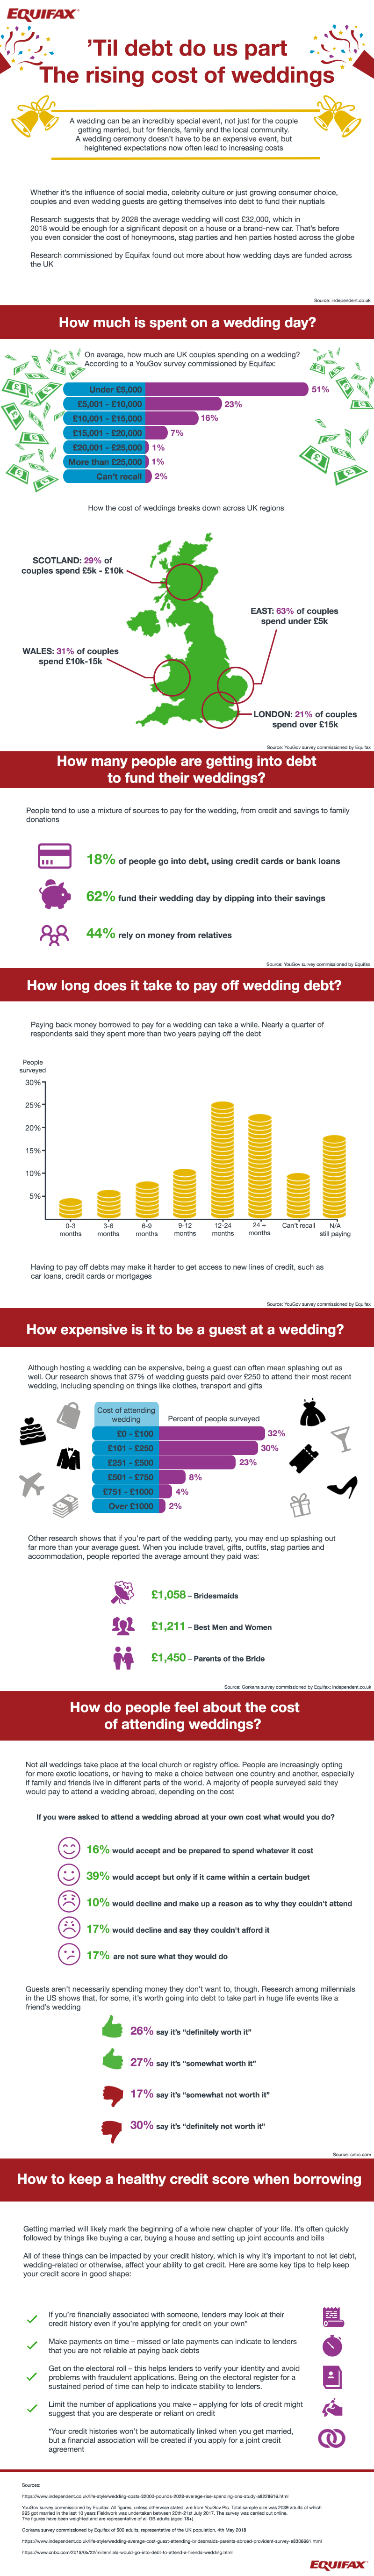 Infographic - The rising cost of weddings